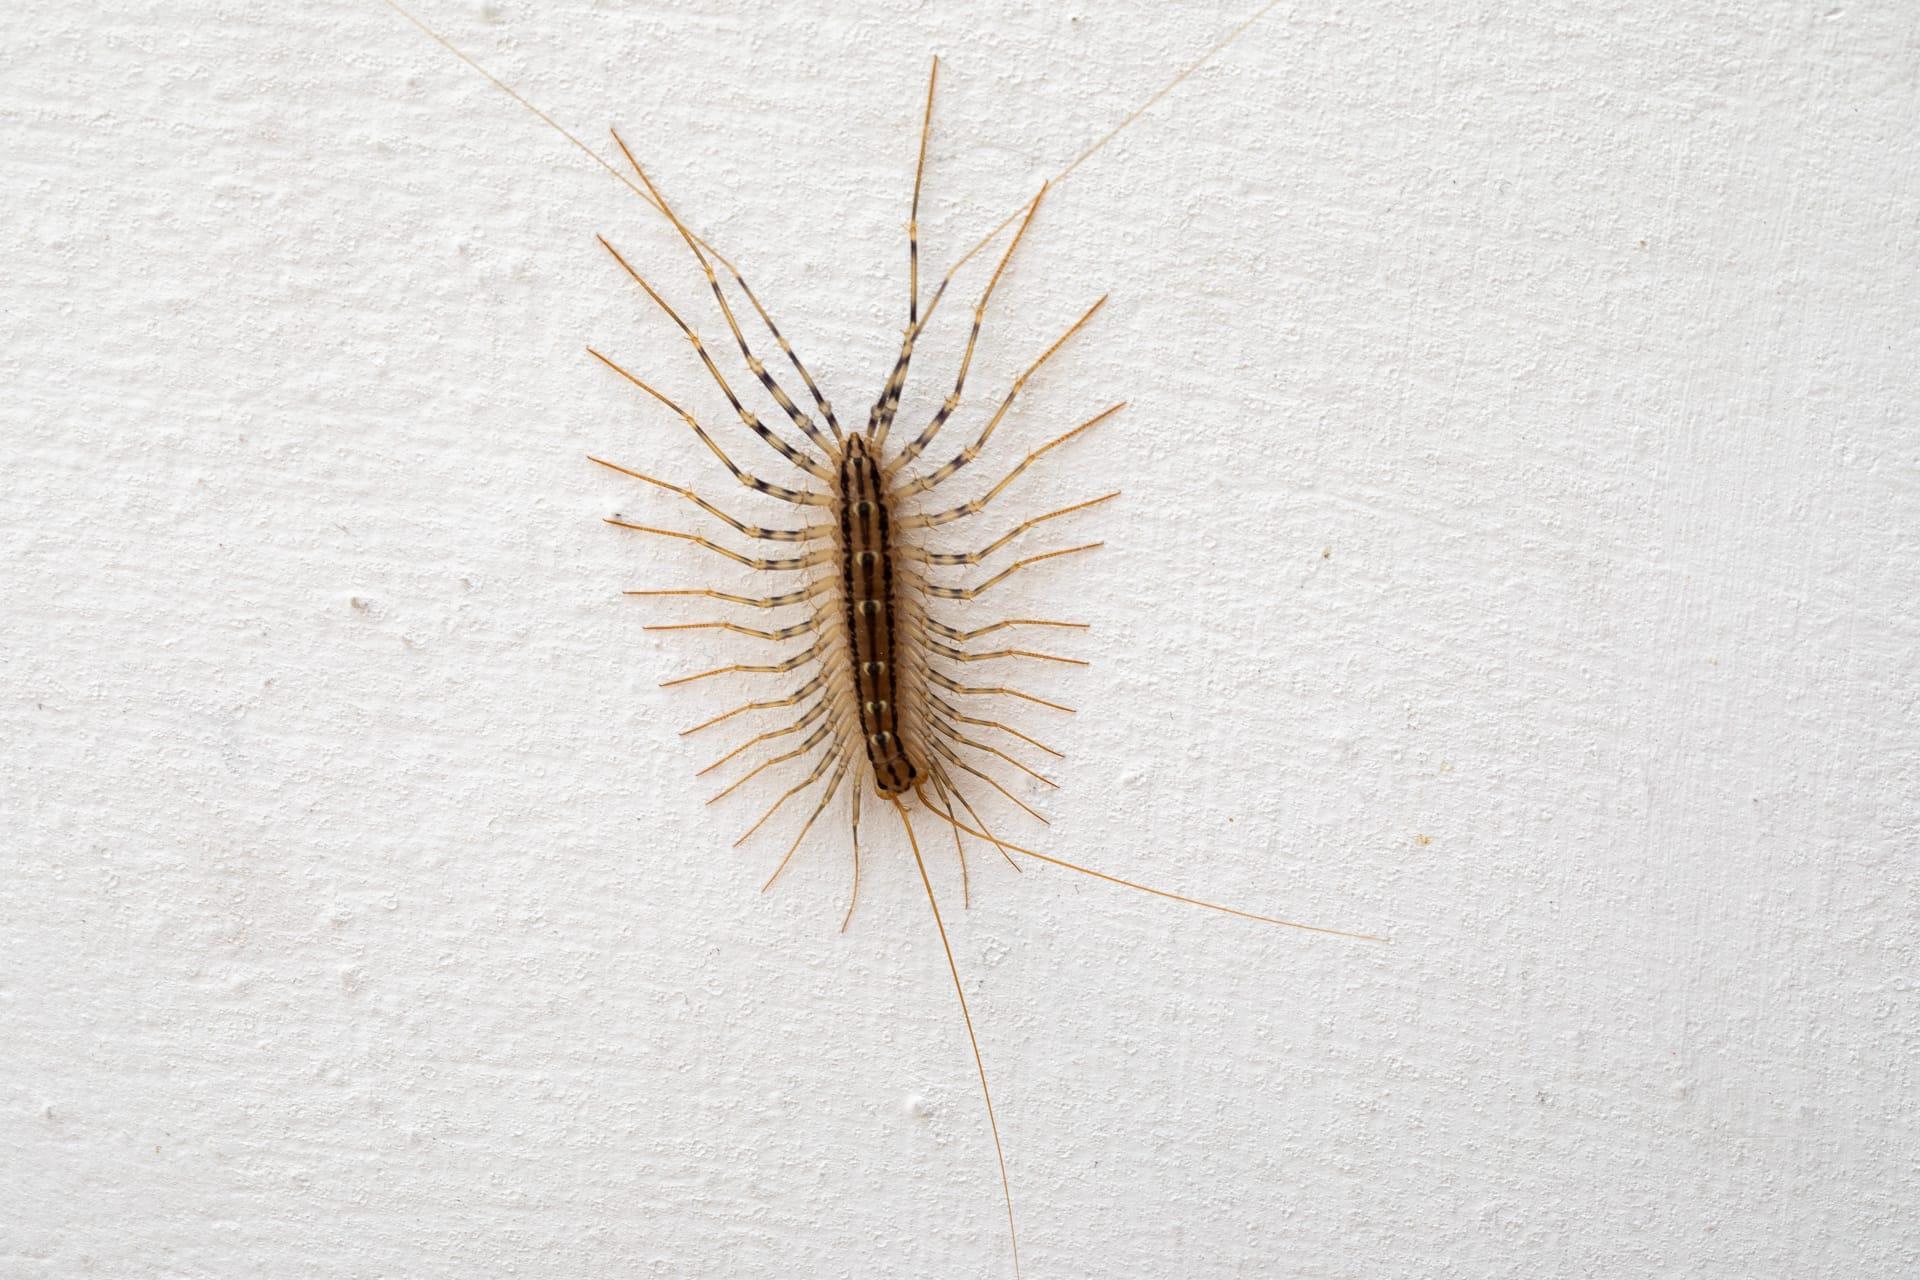 House centipede pictures